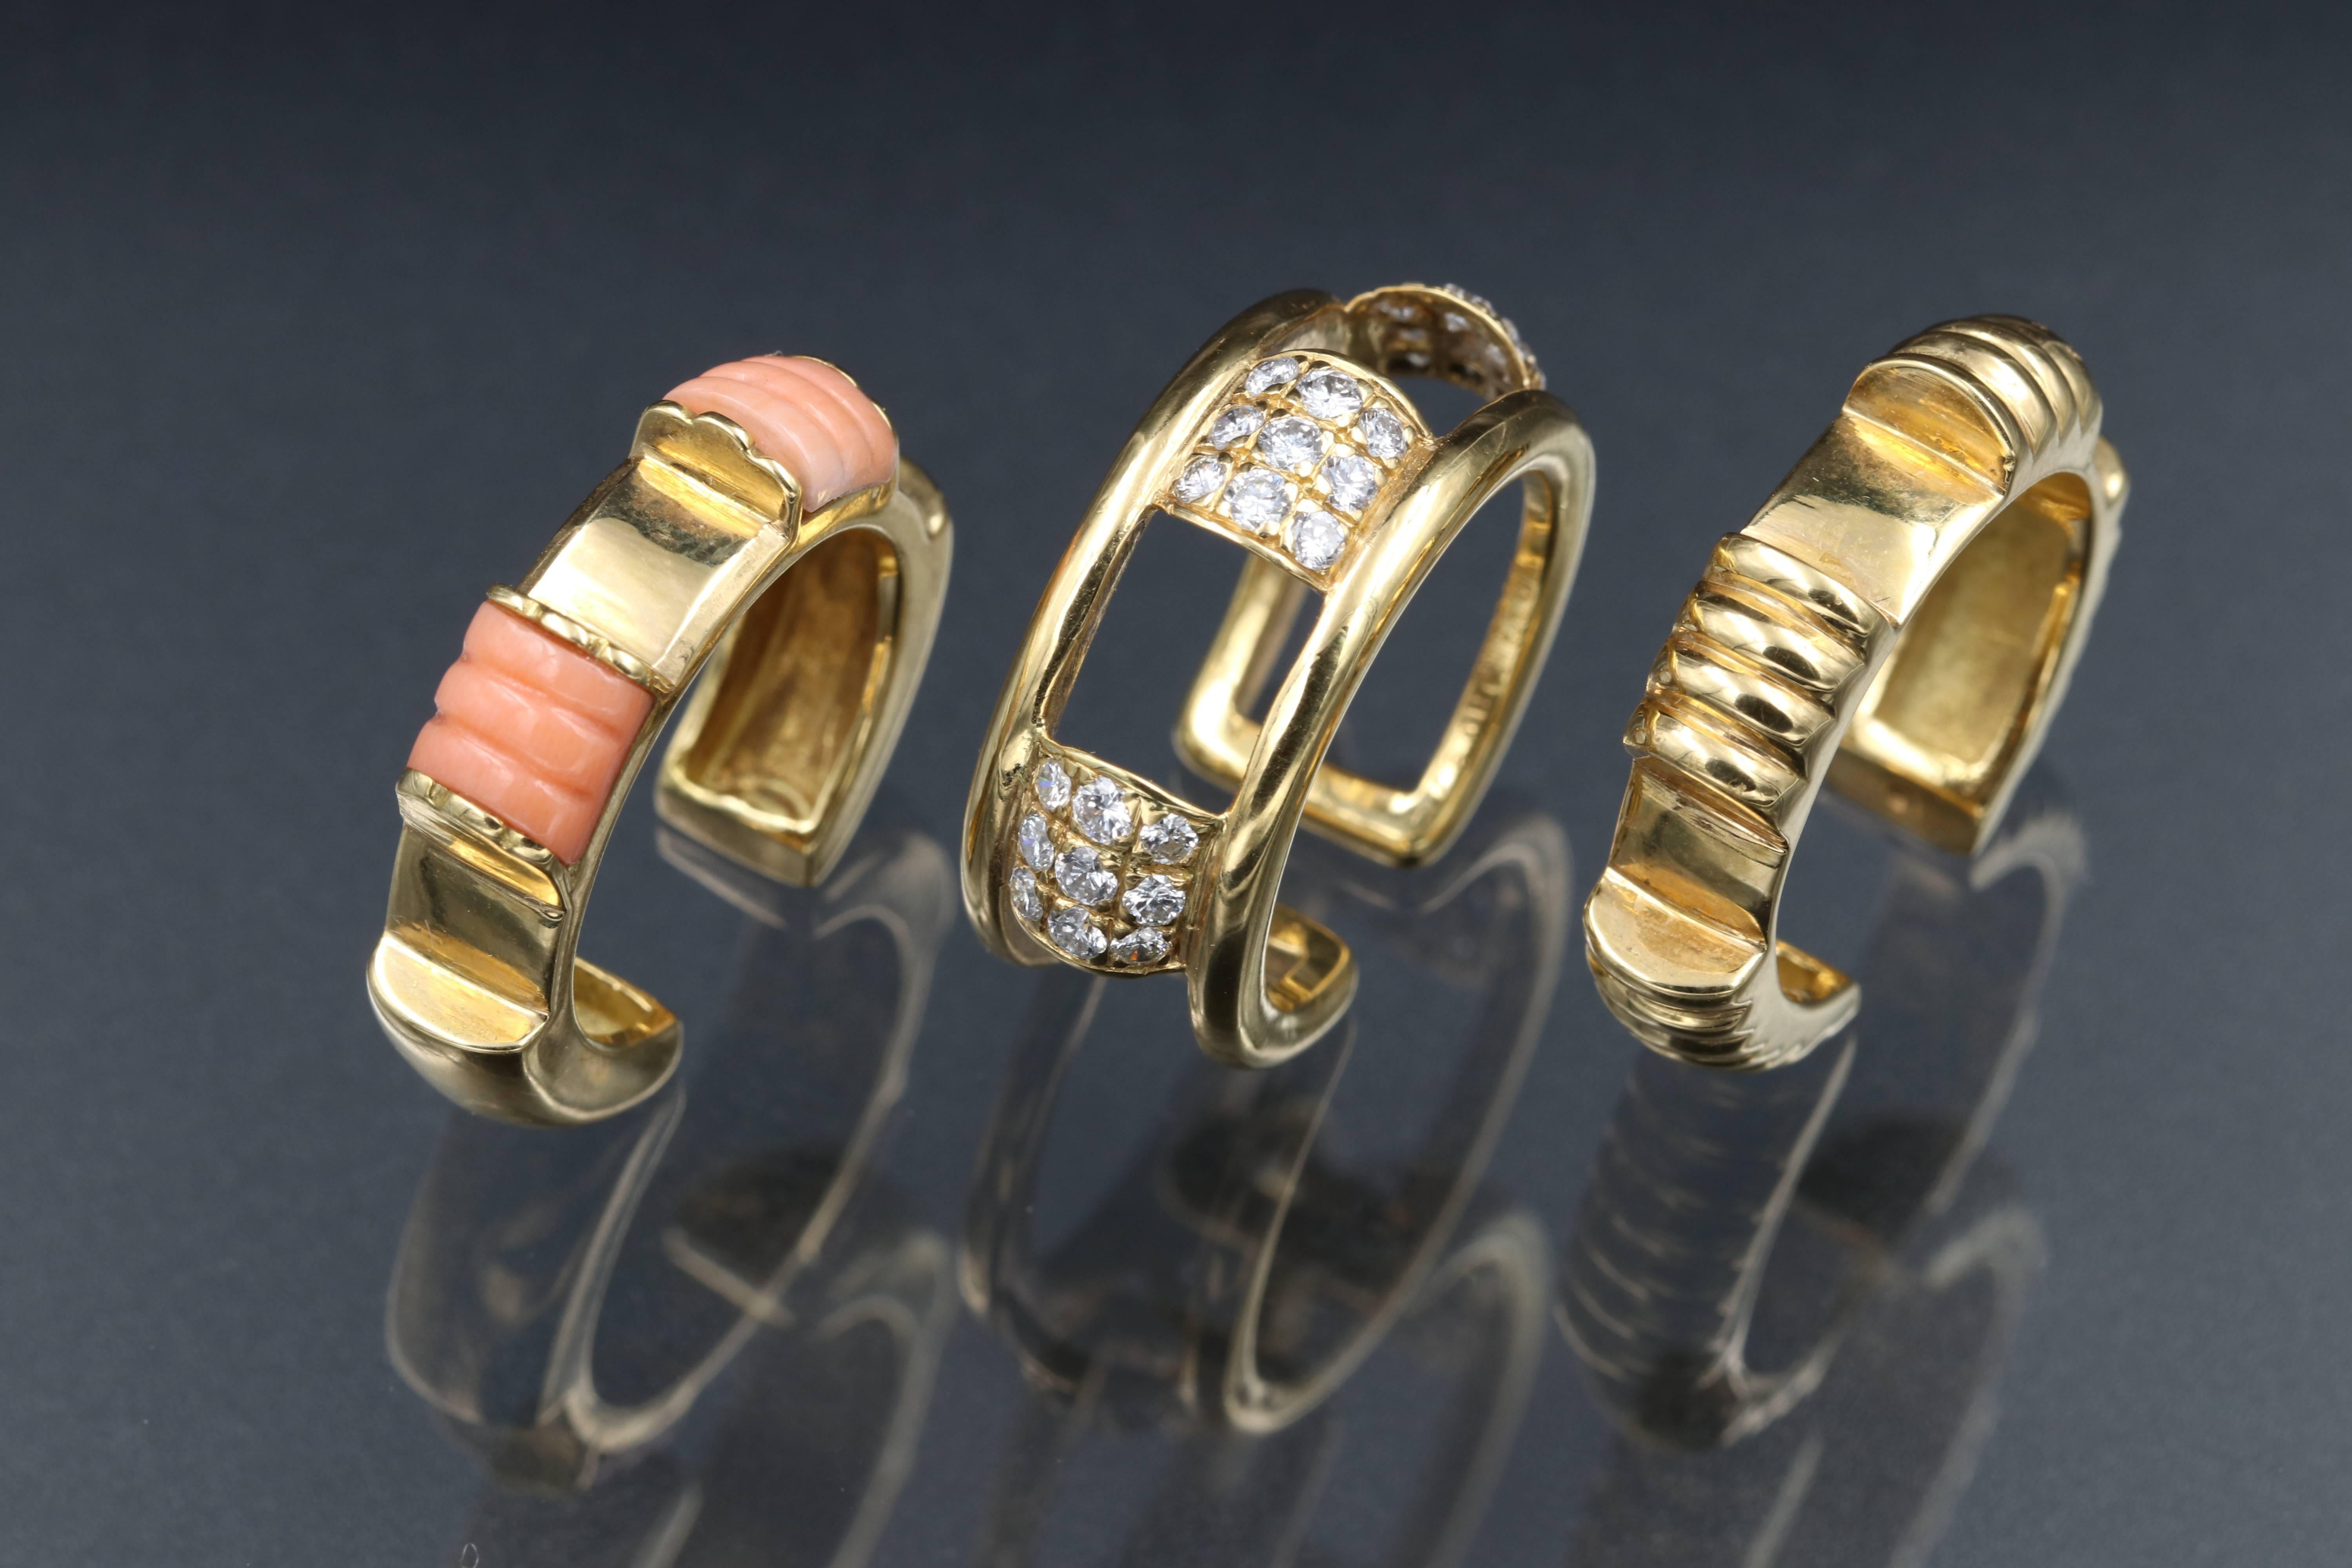 3 exchangeable rings of 18K gold diamonds and coral by Maison Boucheron. Signed
The total weight is 20.3 grams
The size is 51 (5.5 US) not sizeable 

